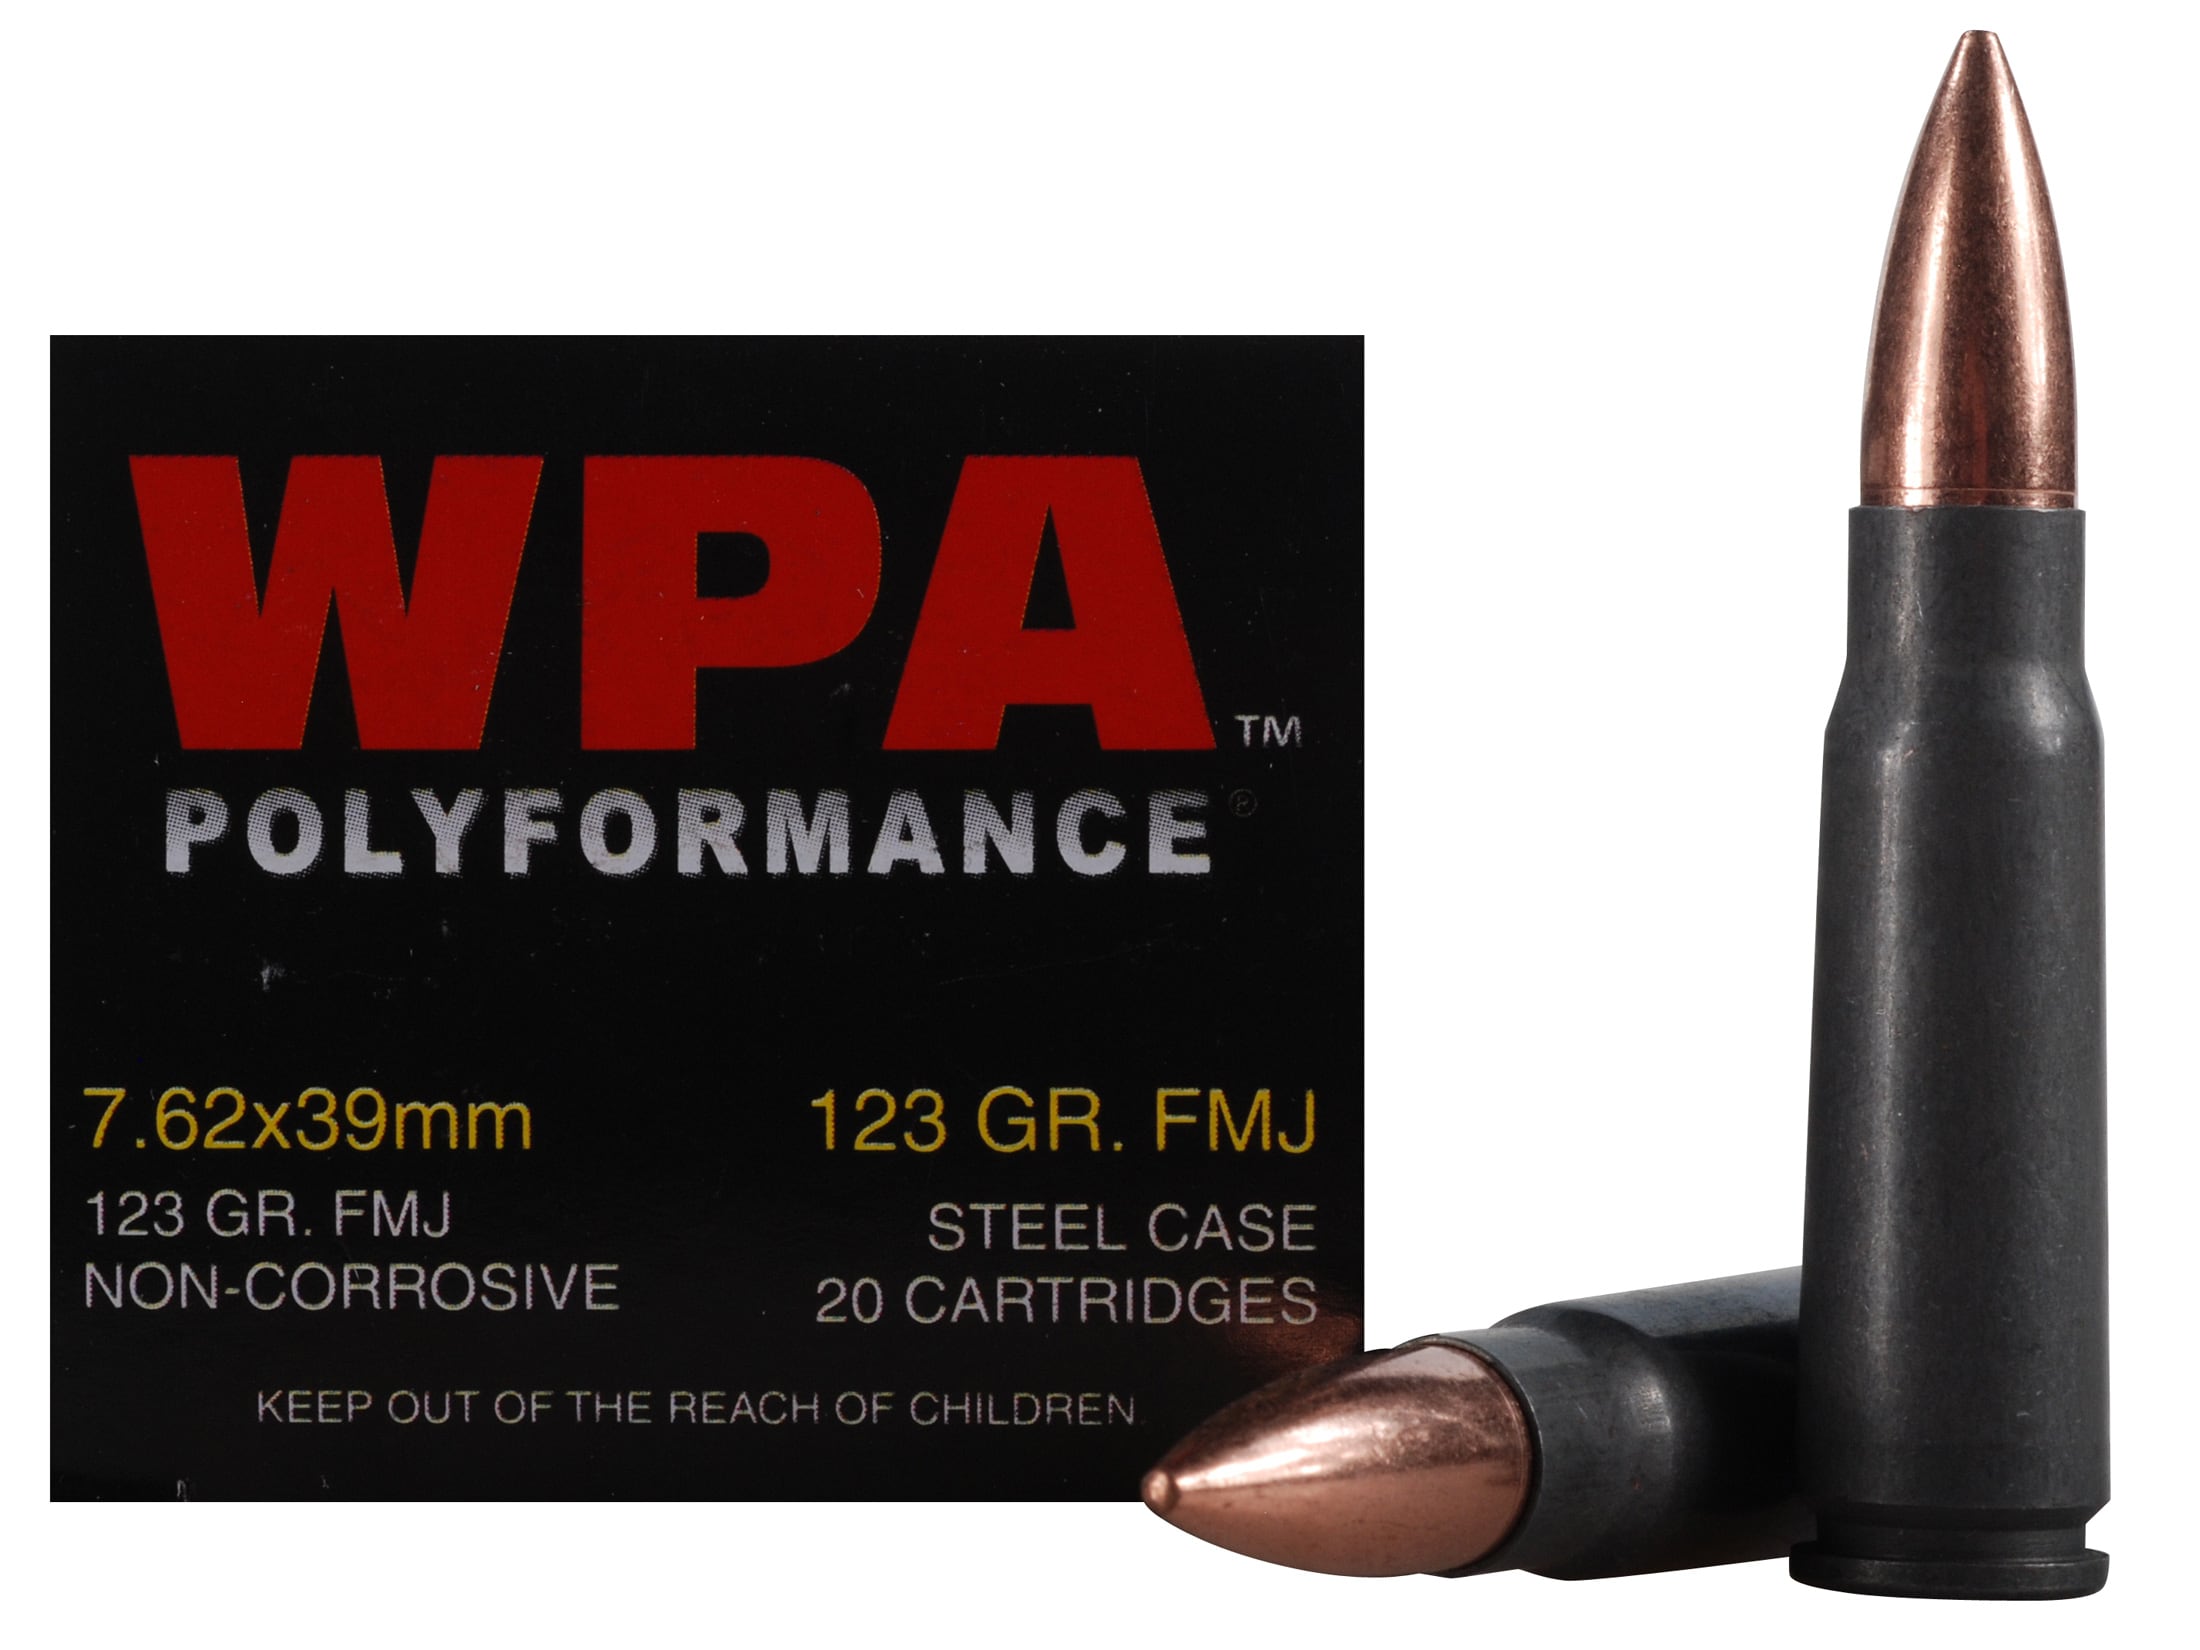 Wolf Performance 7.62x39 Ammo Review: Does it Perform?